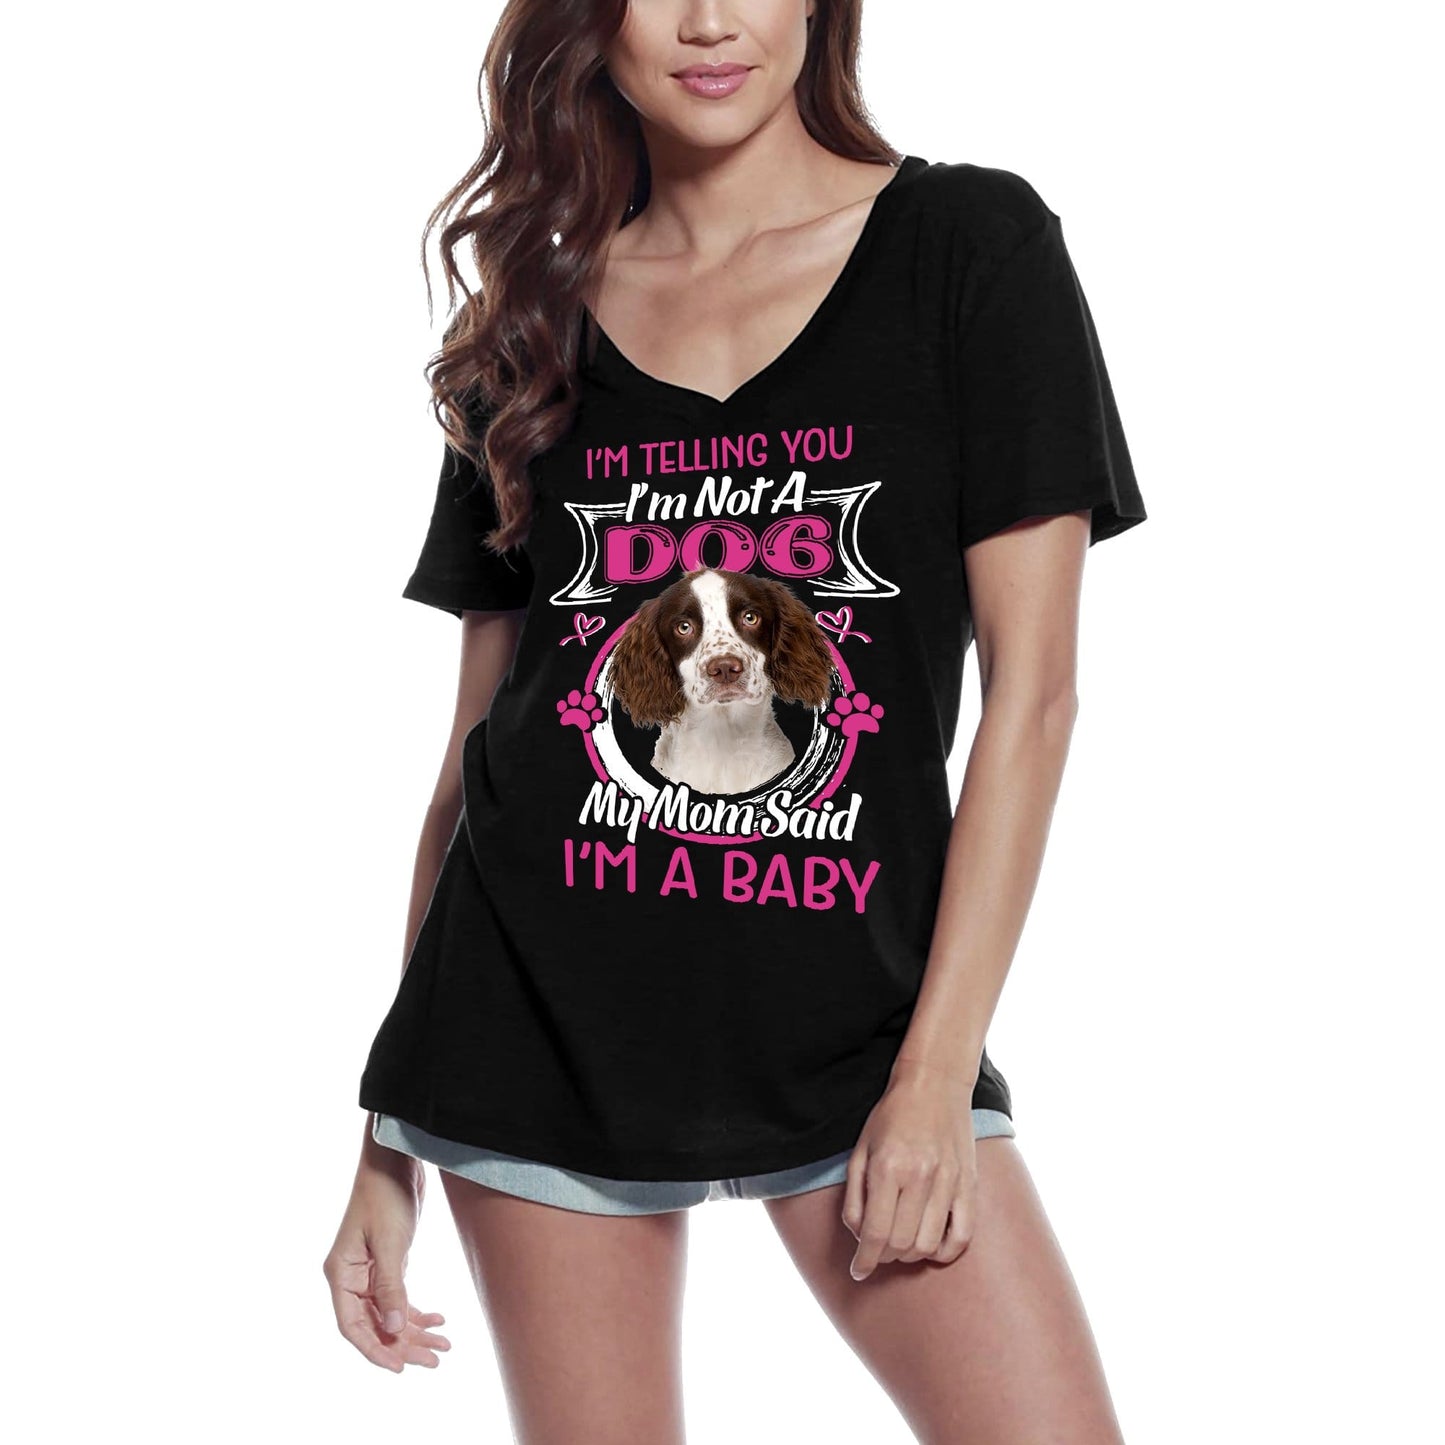 ULTRABASIC Women's T-Shirt I'm Telling You I'm Not a English Springer Spaniel - My Mom Said I'm a Baby - Cute Puppy Dog Lover Tee Shirt